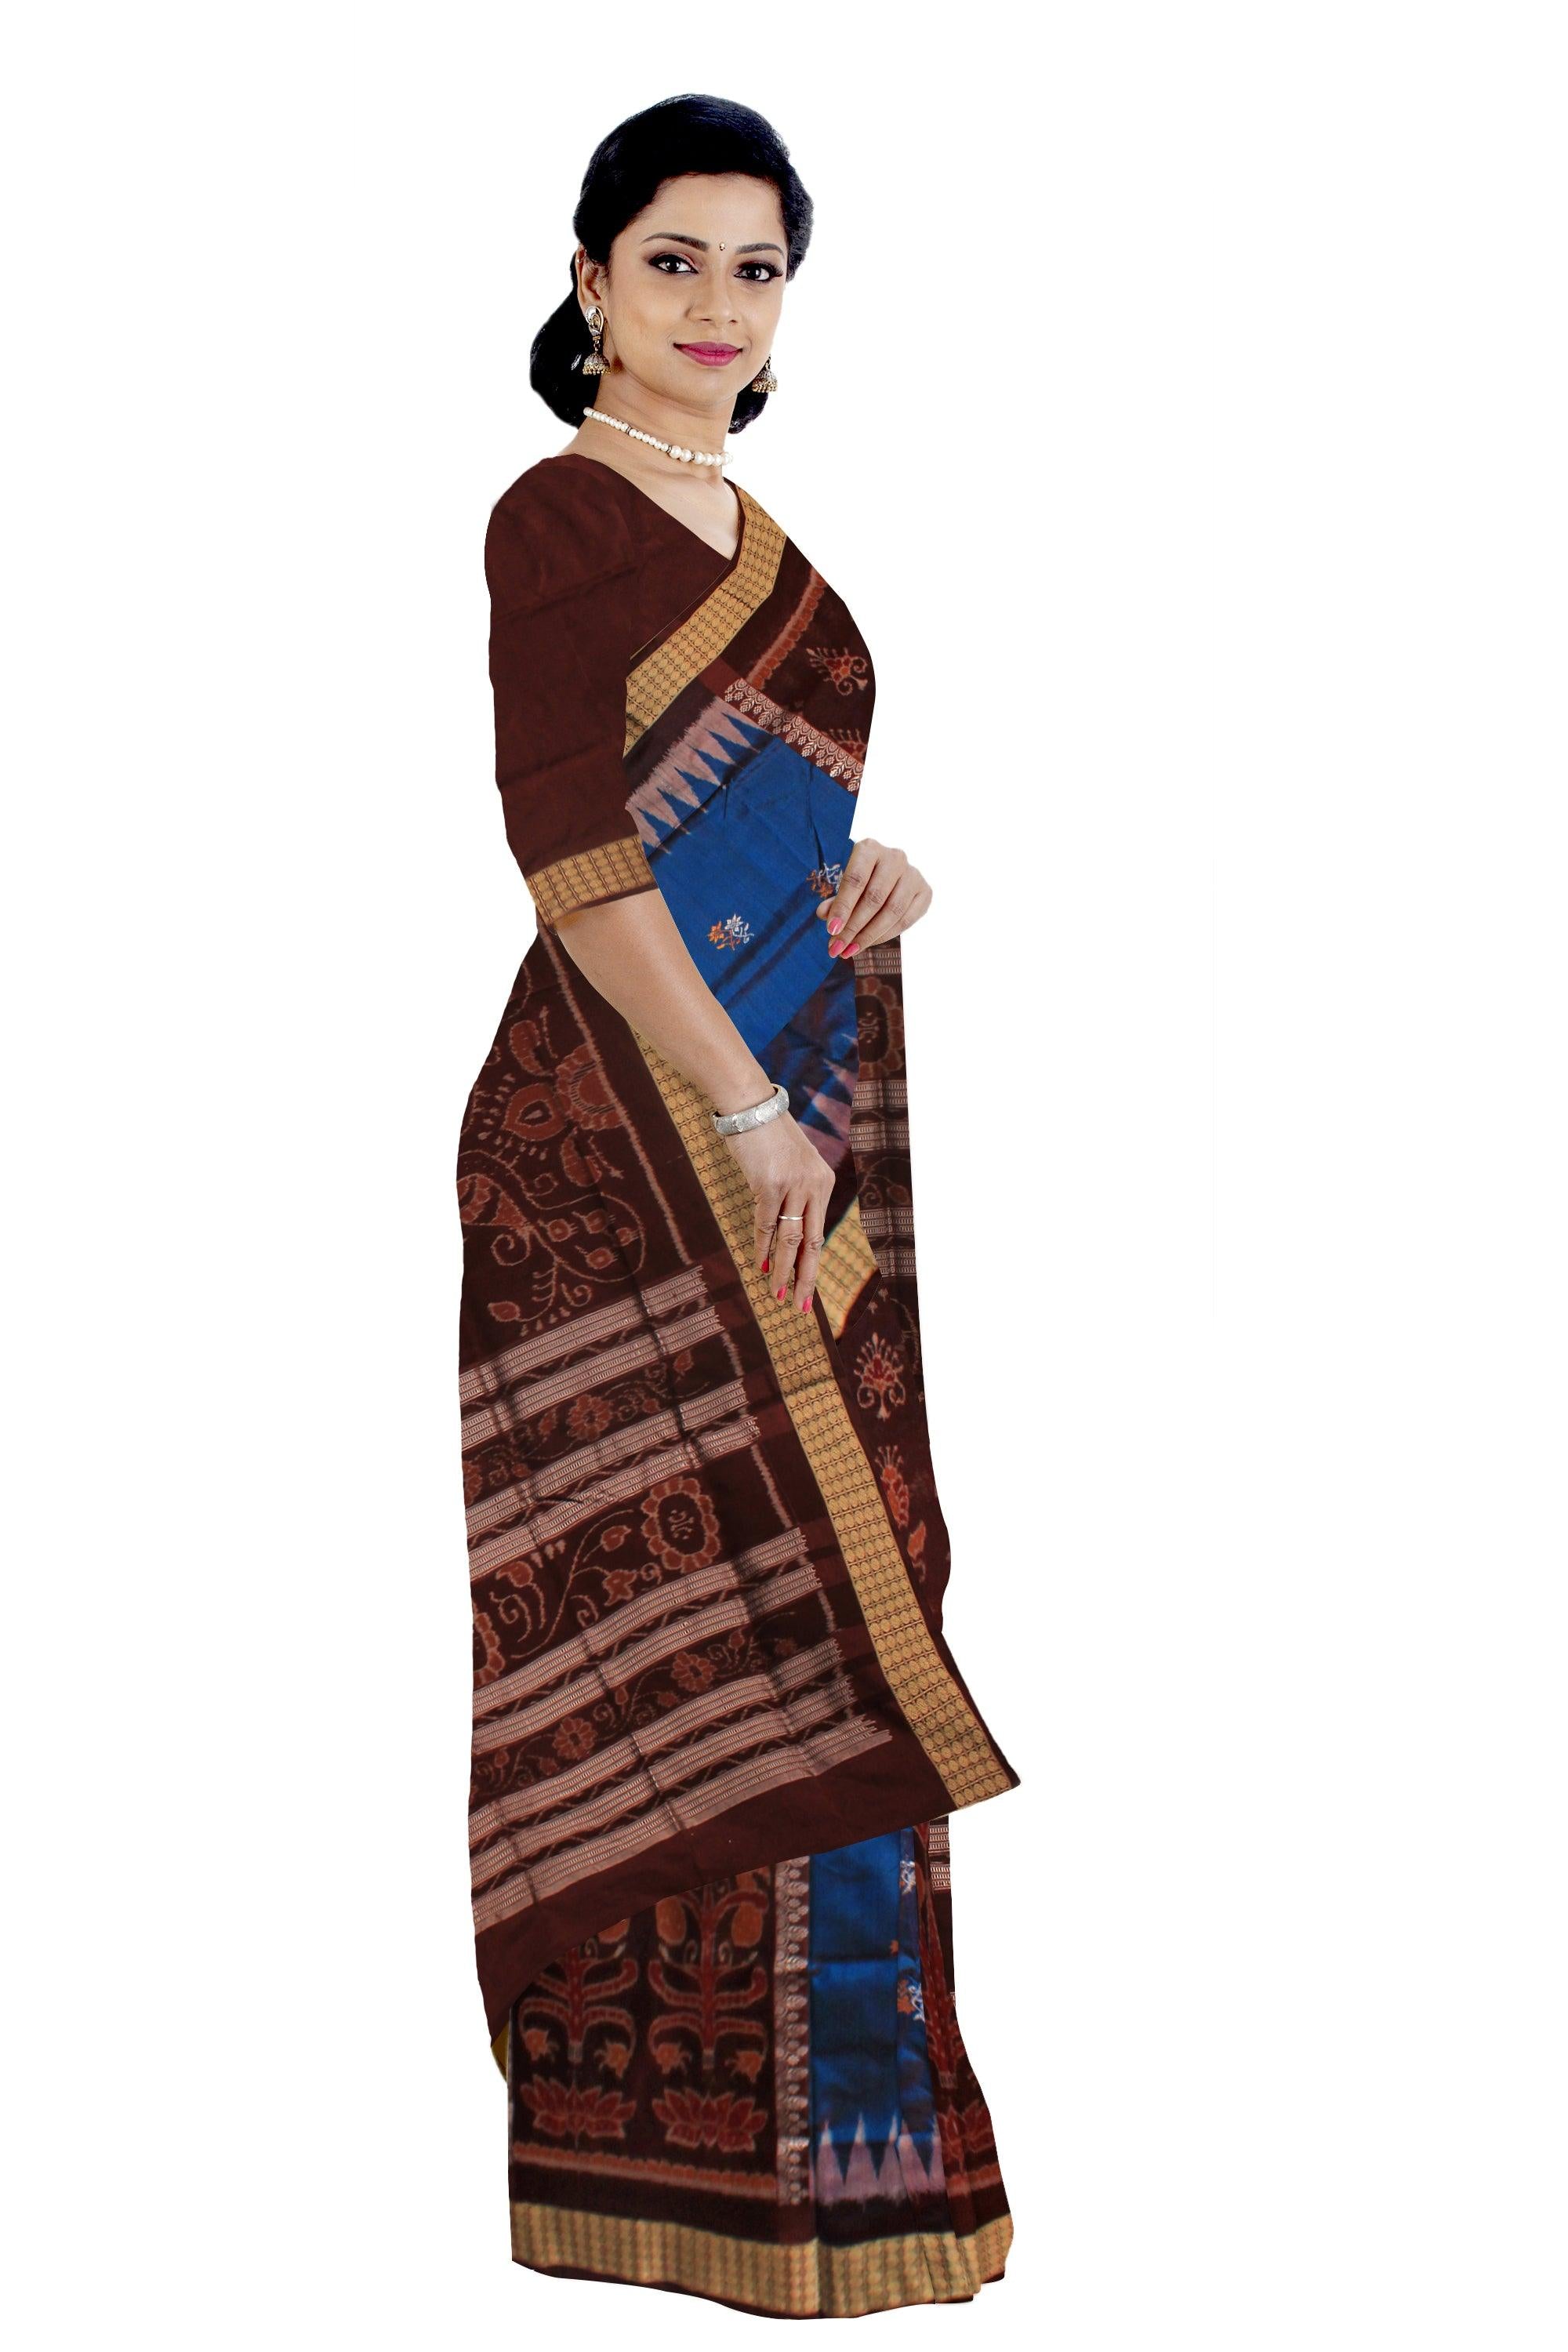 BLUE AND COFFEE COLOR BANDHA PATA SAREE IN NEW DESIGN BASE, ATTACHED WITH BLOUSE PIECE. - Koshali Arts & Crafts Enterprise